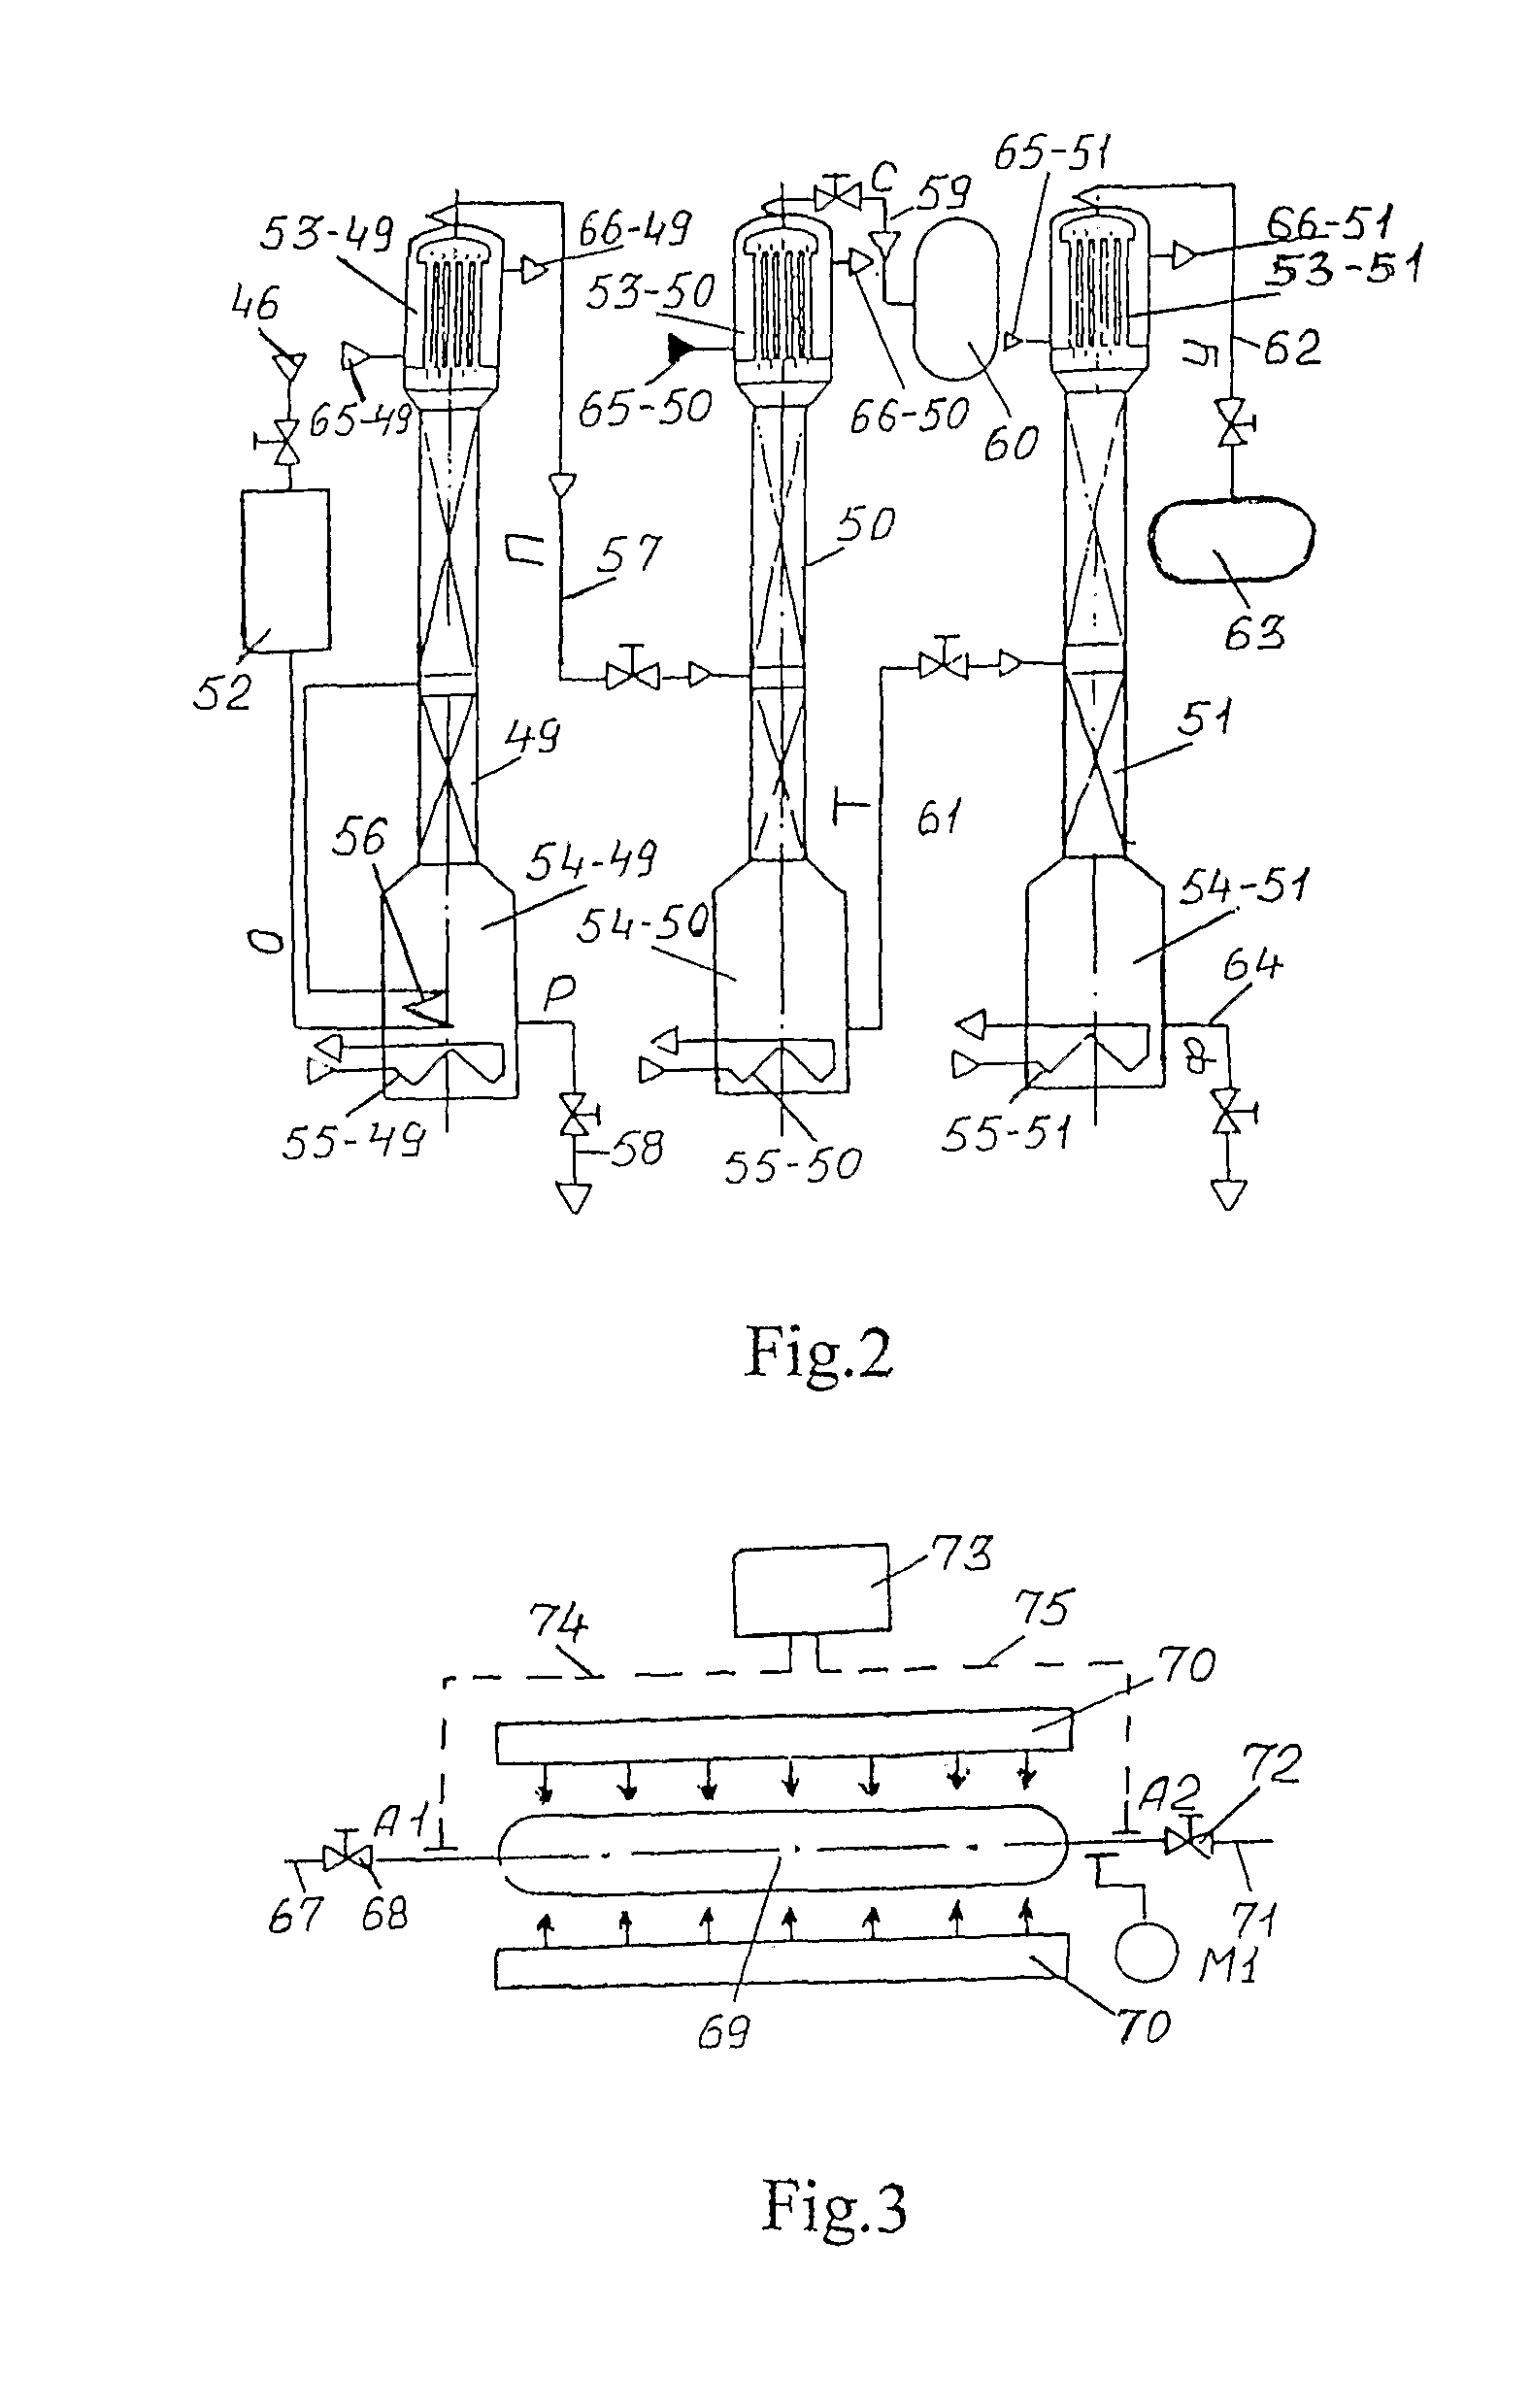 Method and apparatus for purifying and separating a heavy component concentrate along with obtaining light gas isotopes